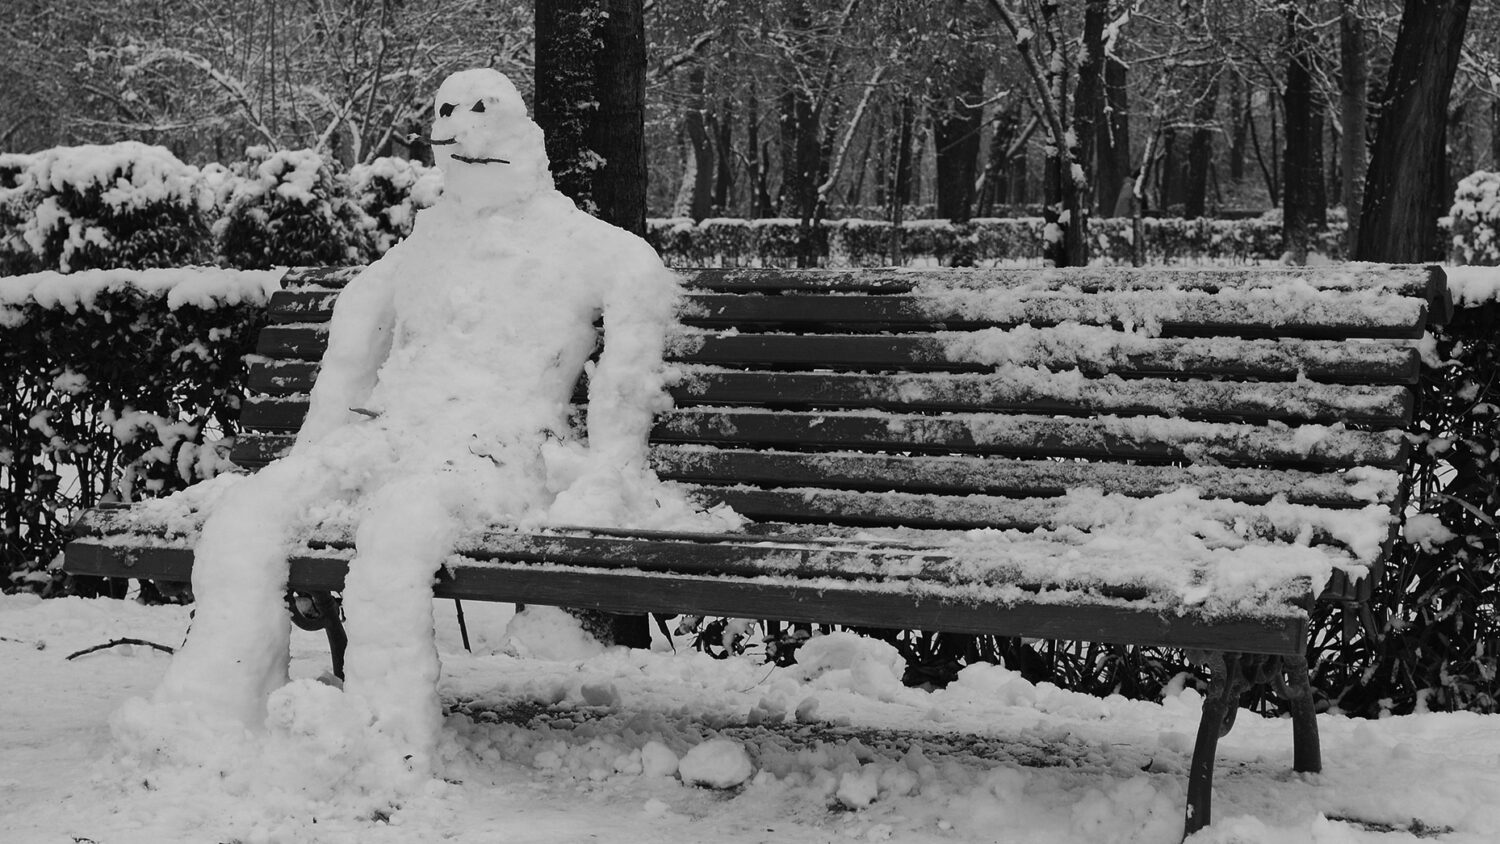 Snowman sitting on bench. Photo in black and white